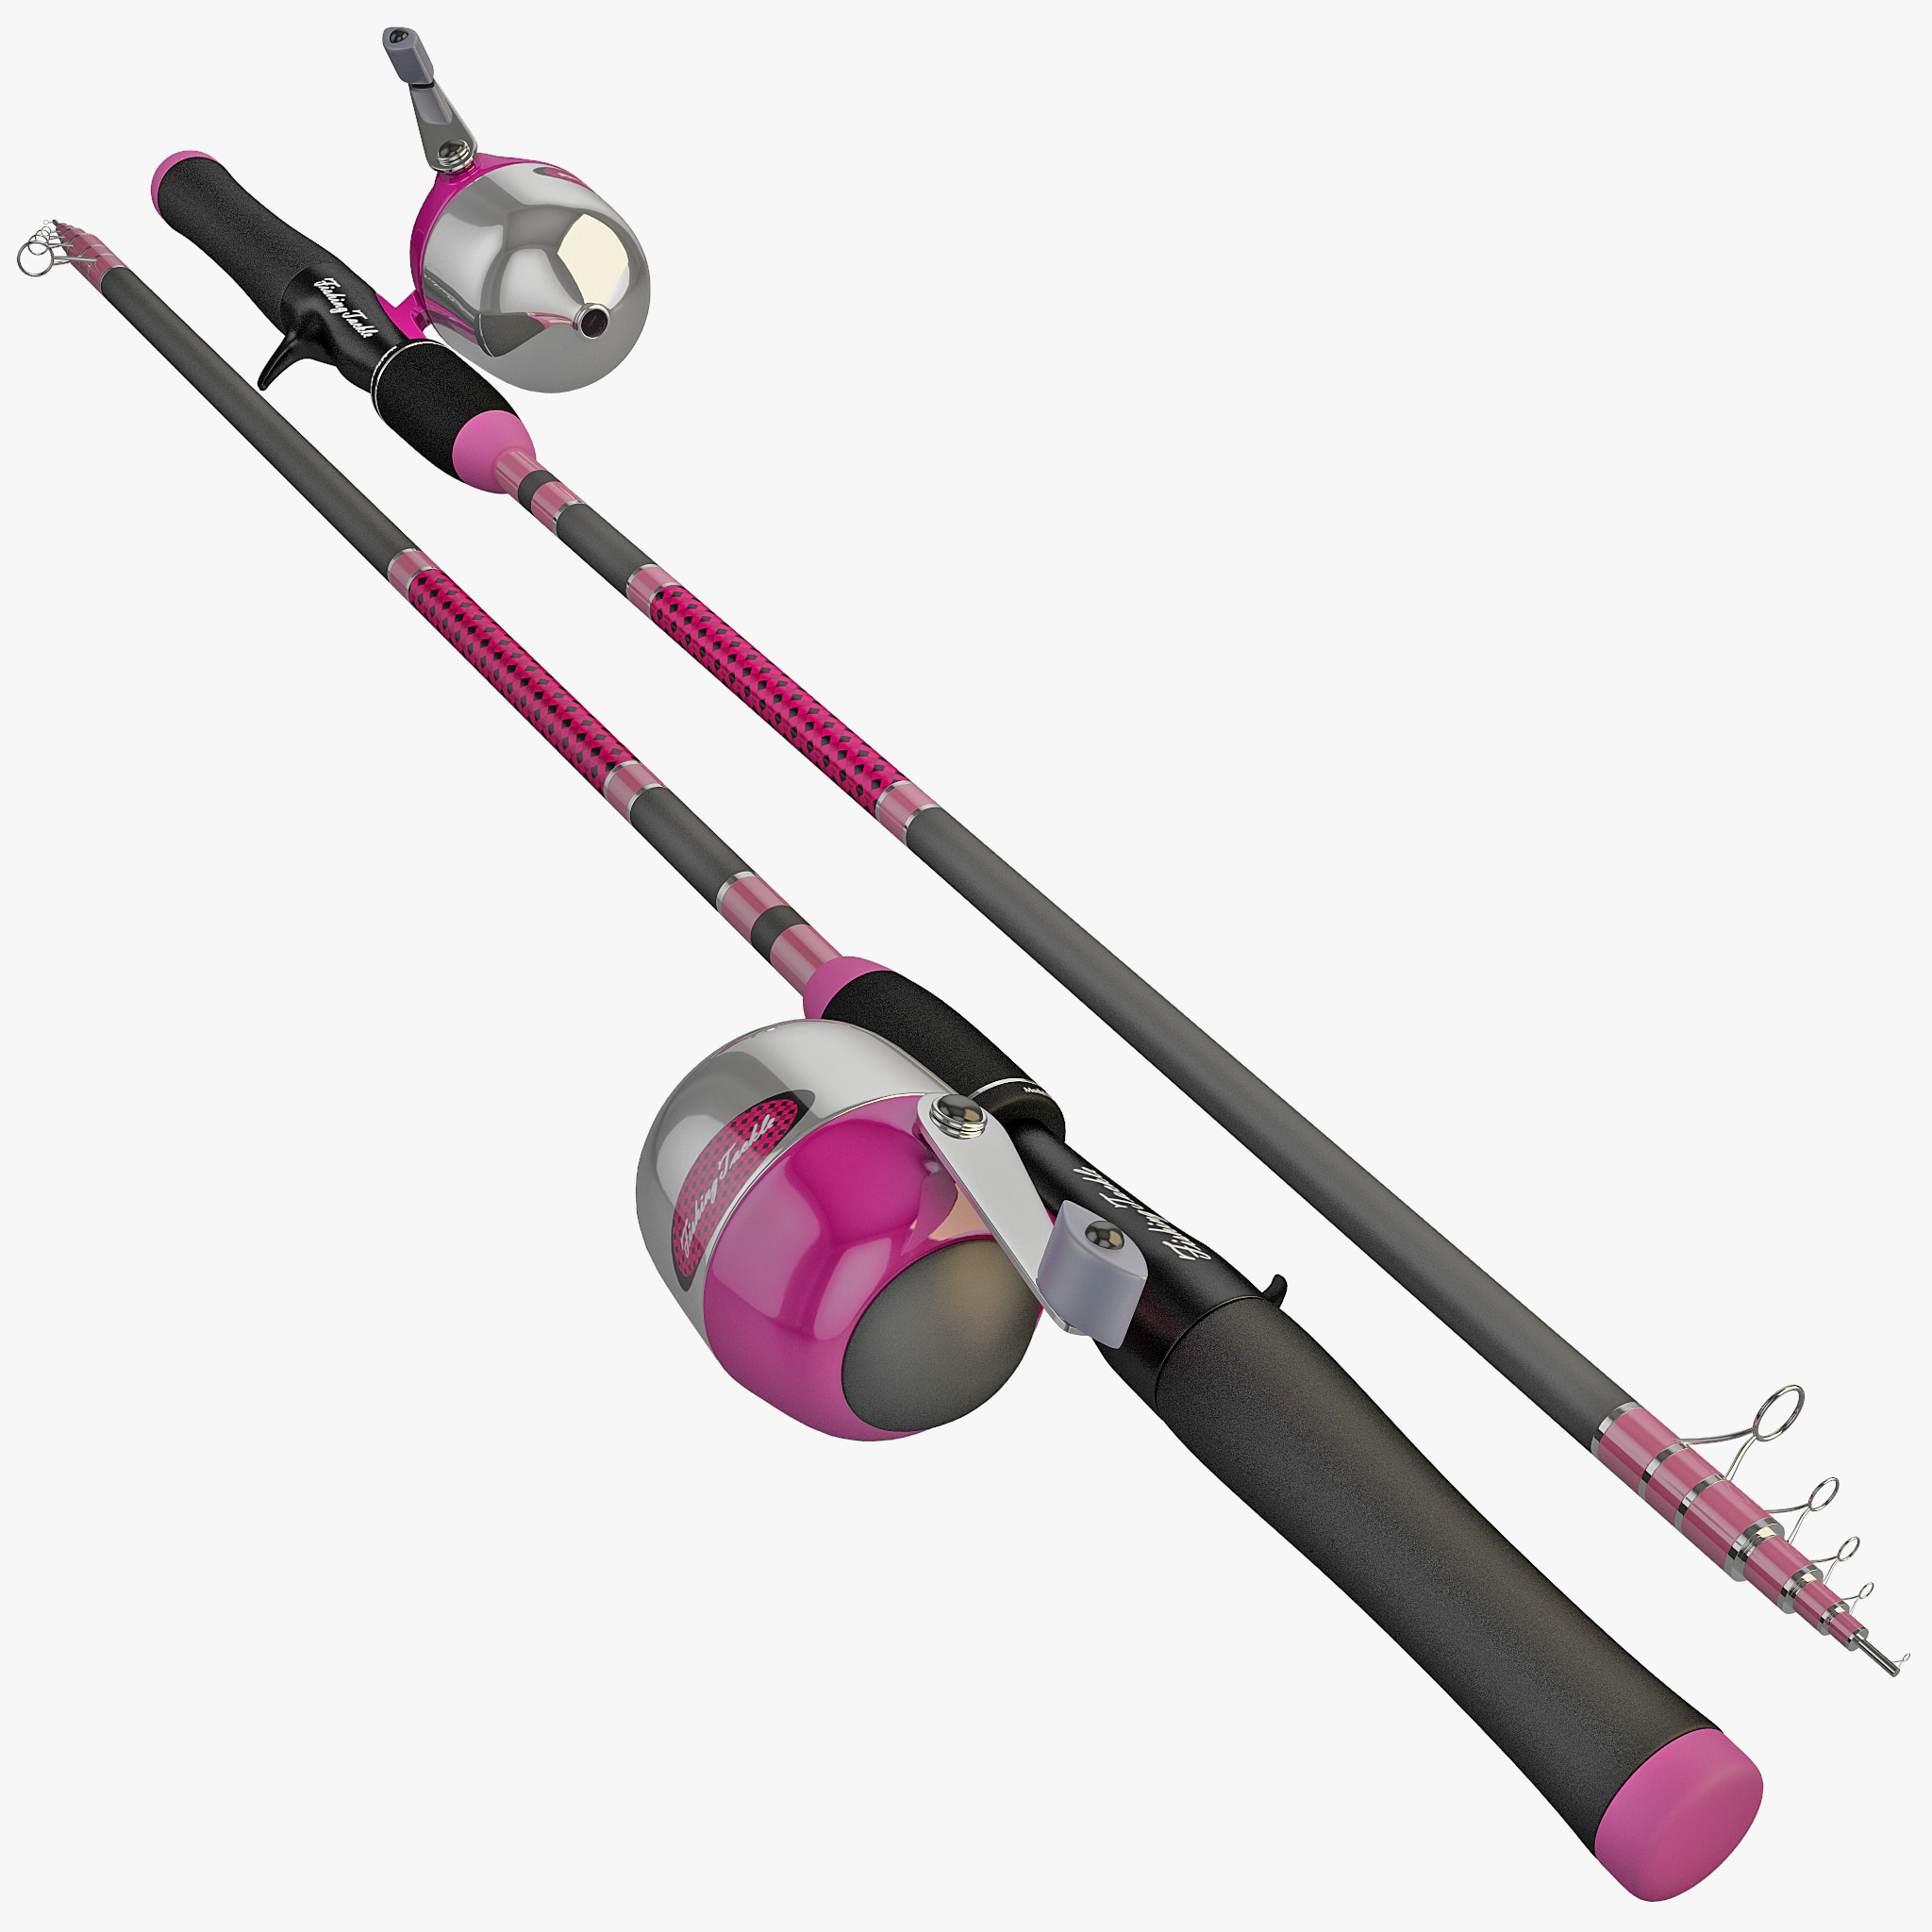 Searched 3d models for Fishing rod